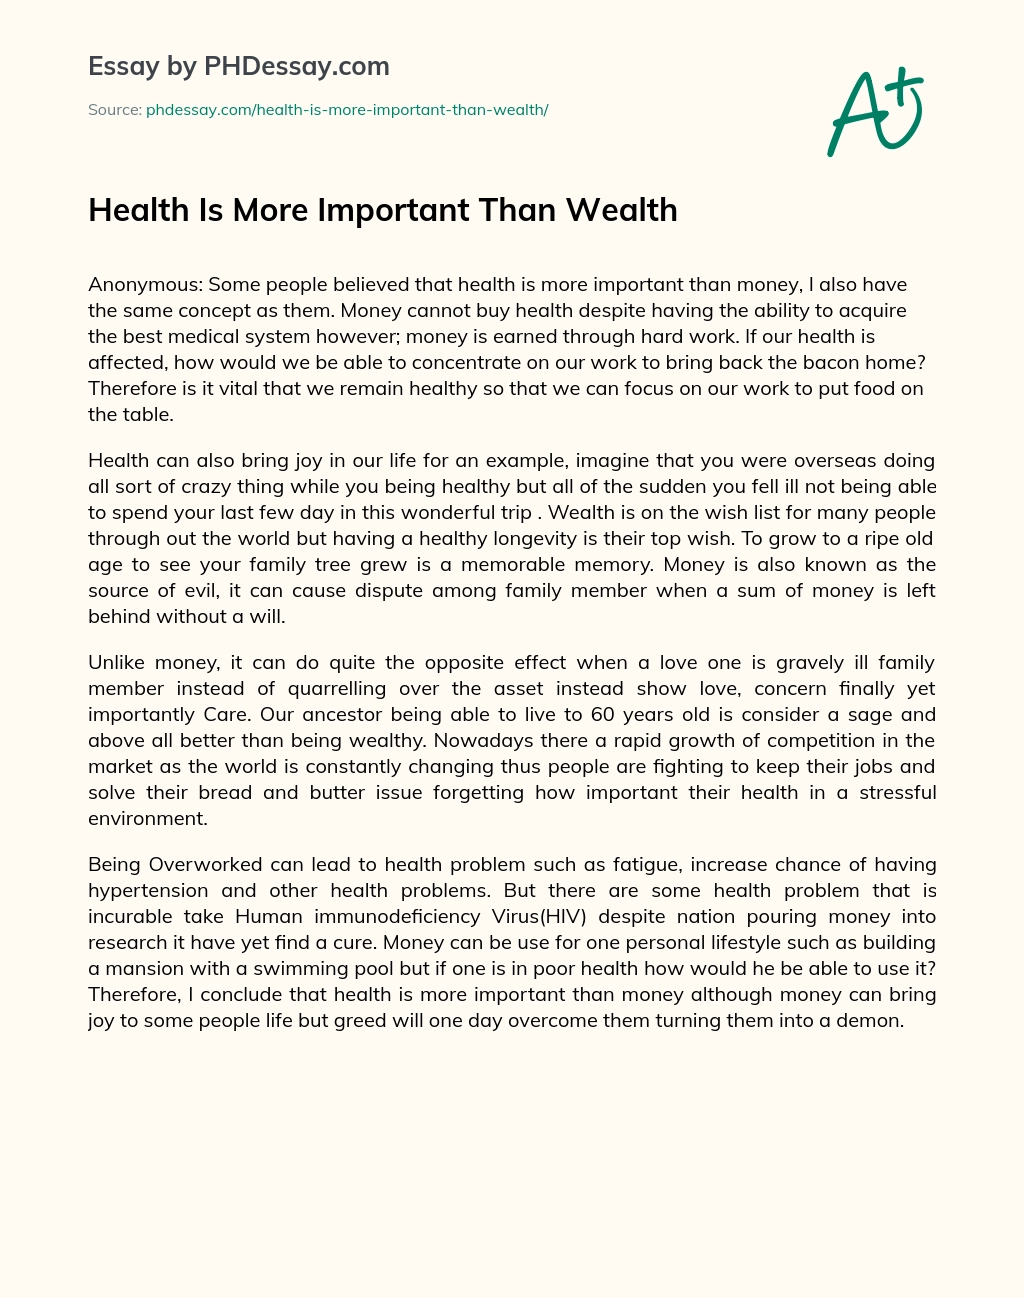 good health is better than wealth essay